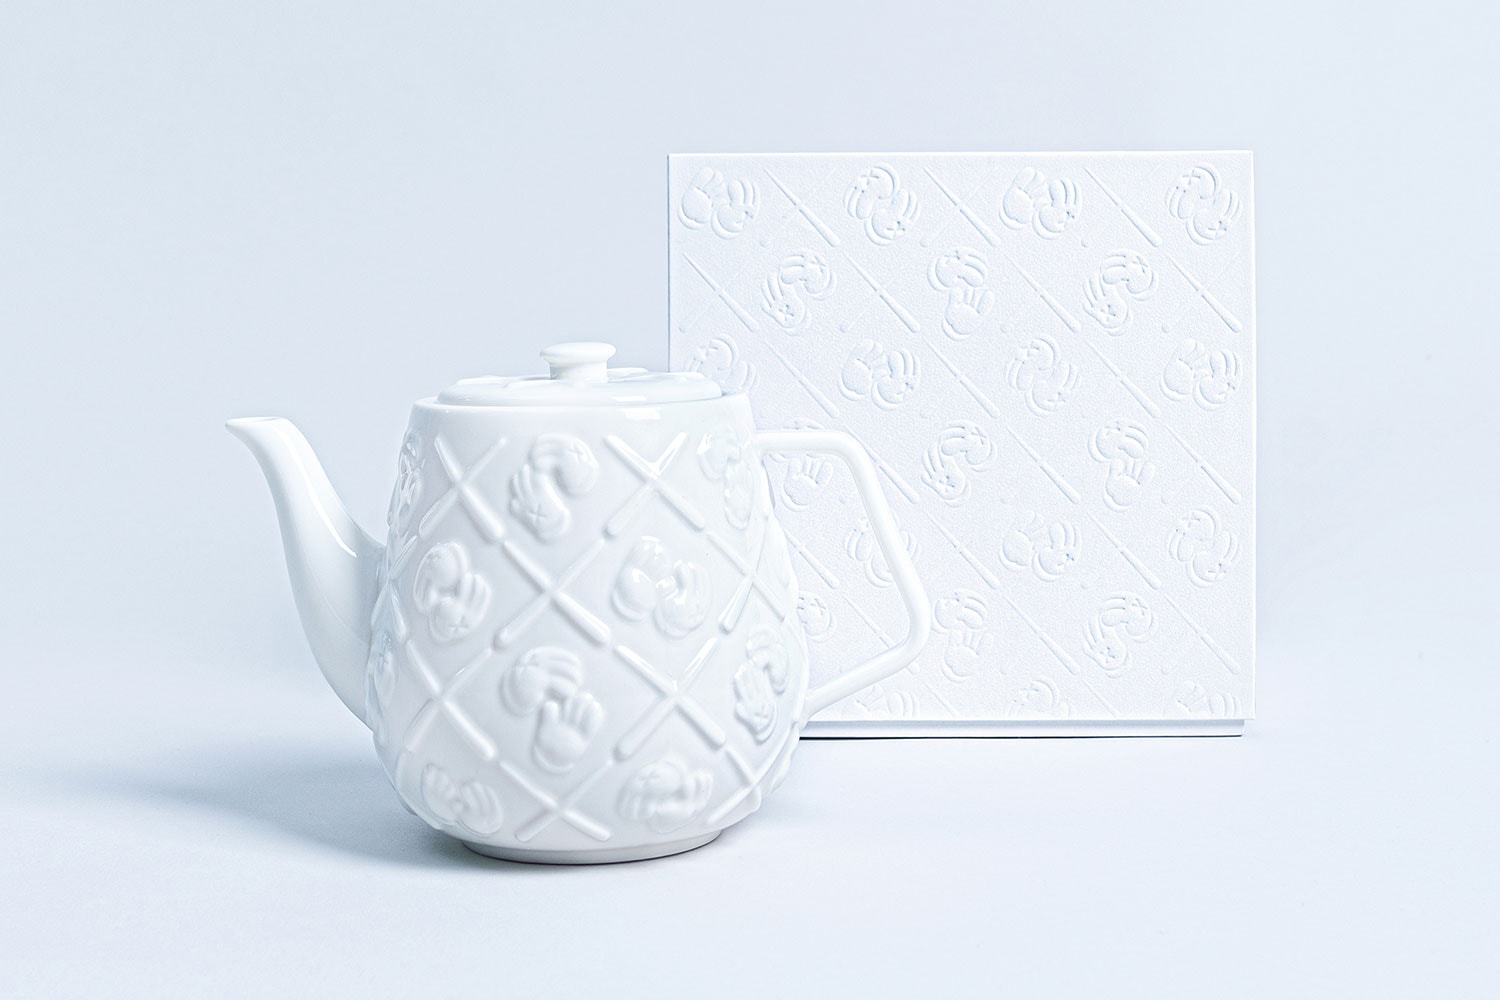 KAWS XX gloved hands Monogram Teapot AllRightsReserved collaboration ceramic white brew infusion